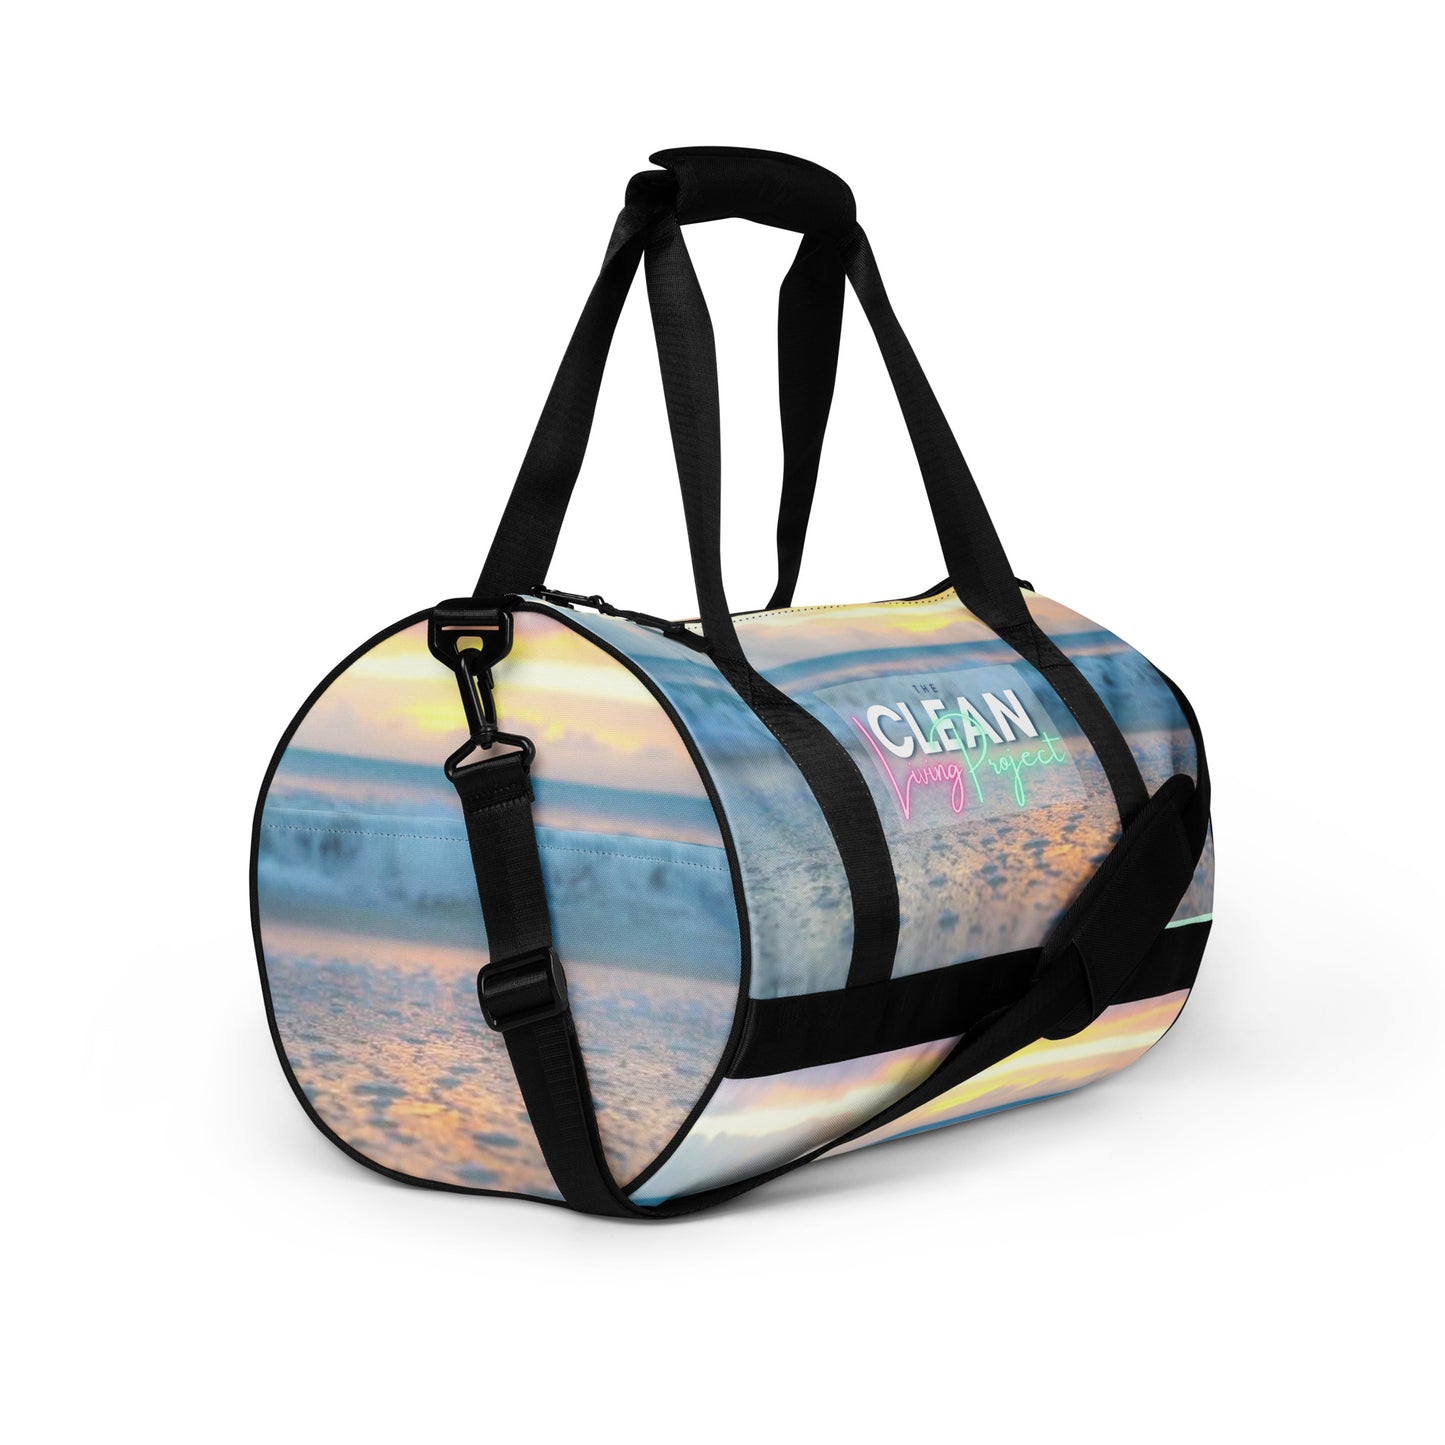 The Clean Living Project All-Over Print Gym Bag (waves)